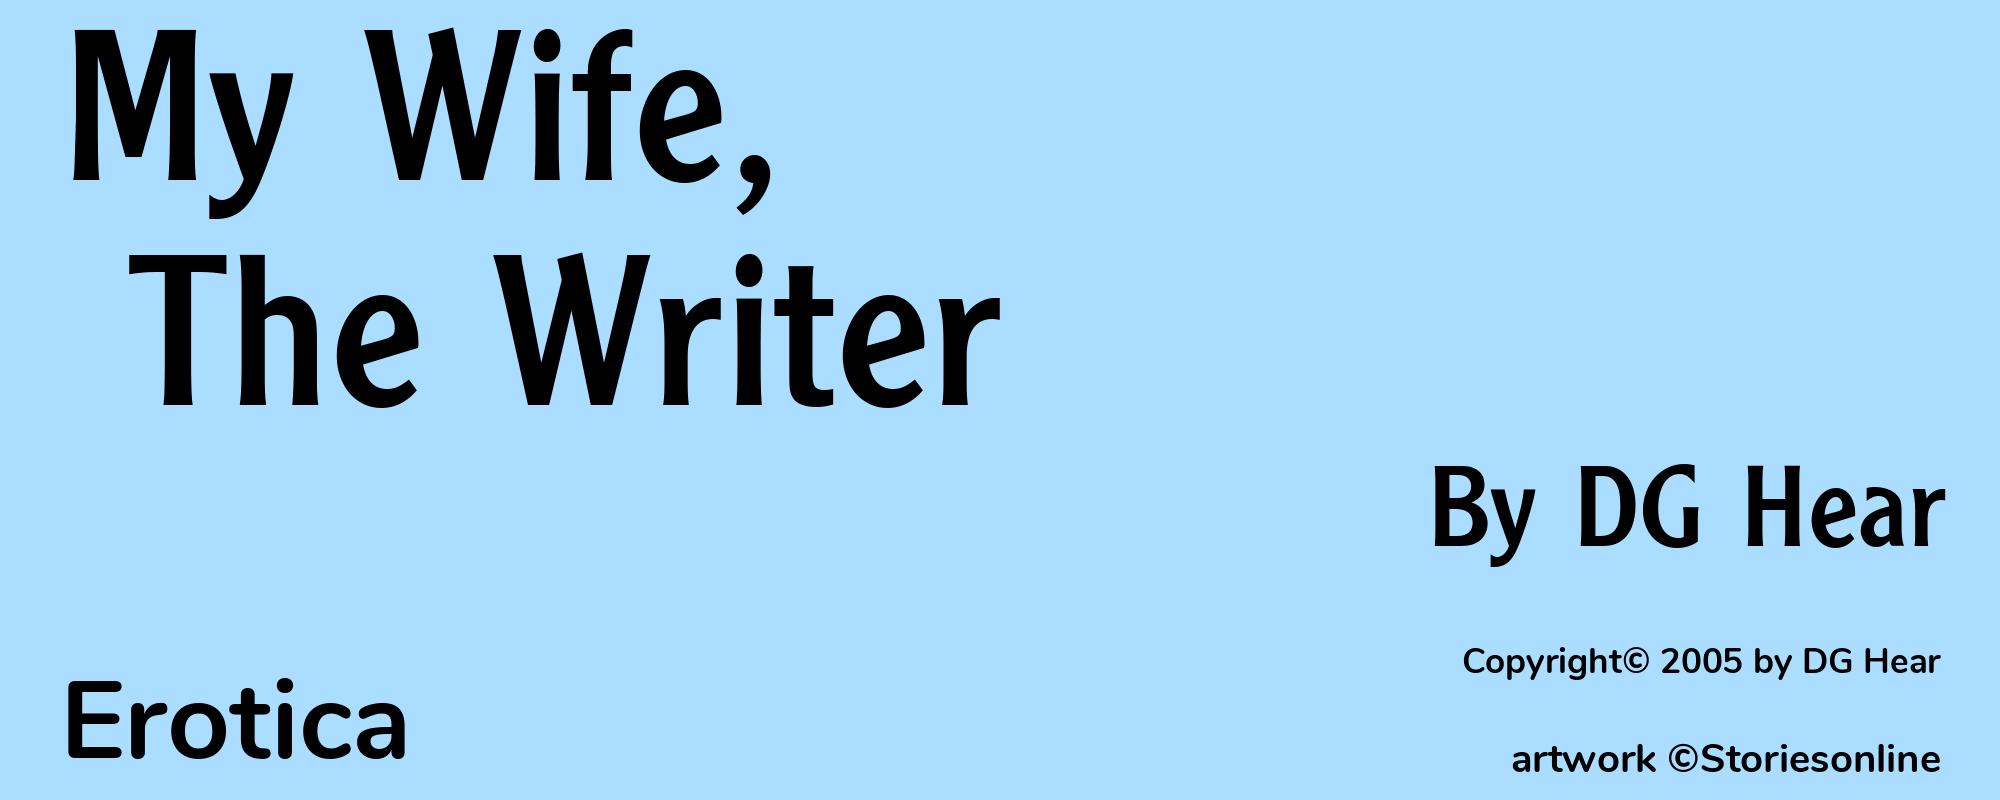 My Wife, The Writer - Cover